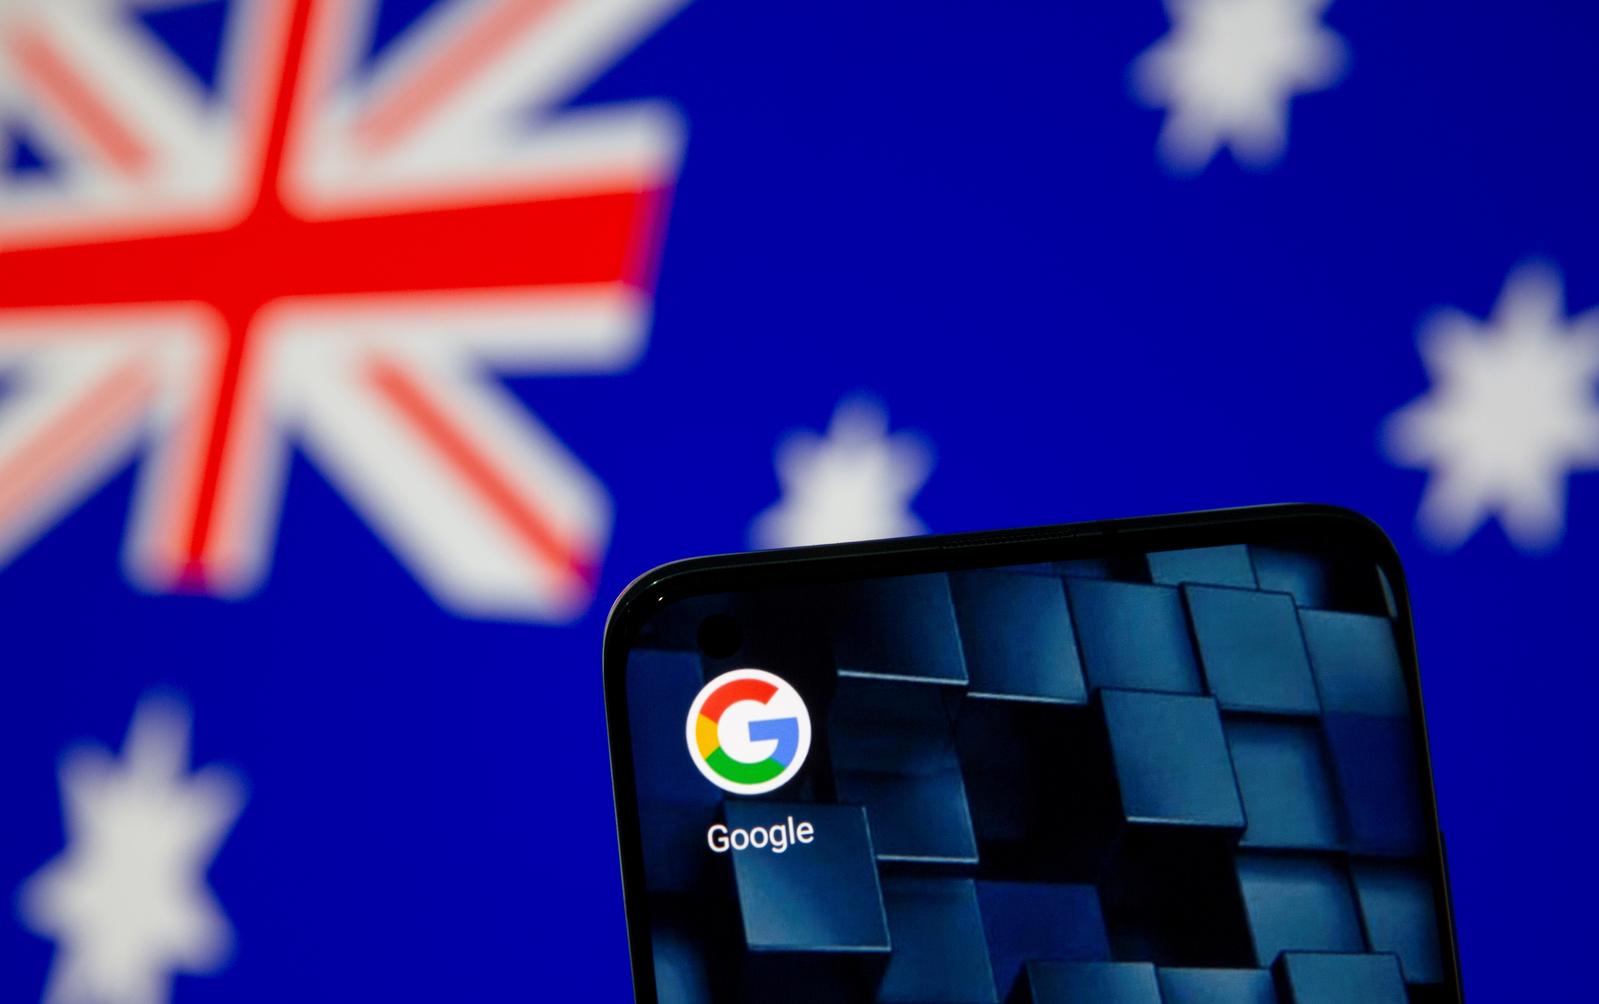 Australian lawmakers expected to pass amendments to Facebook, Google law